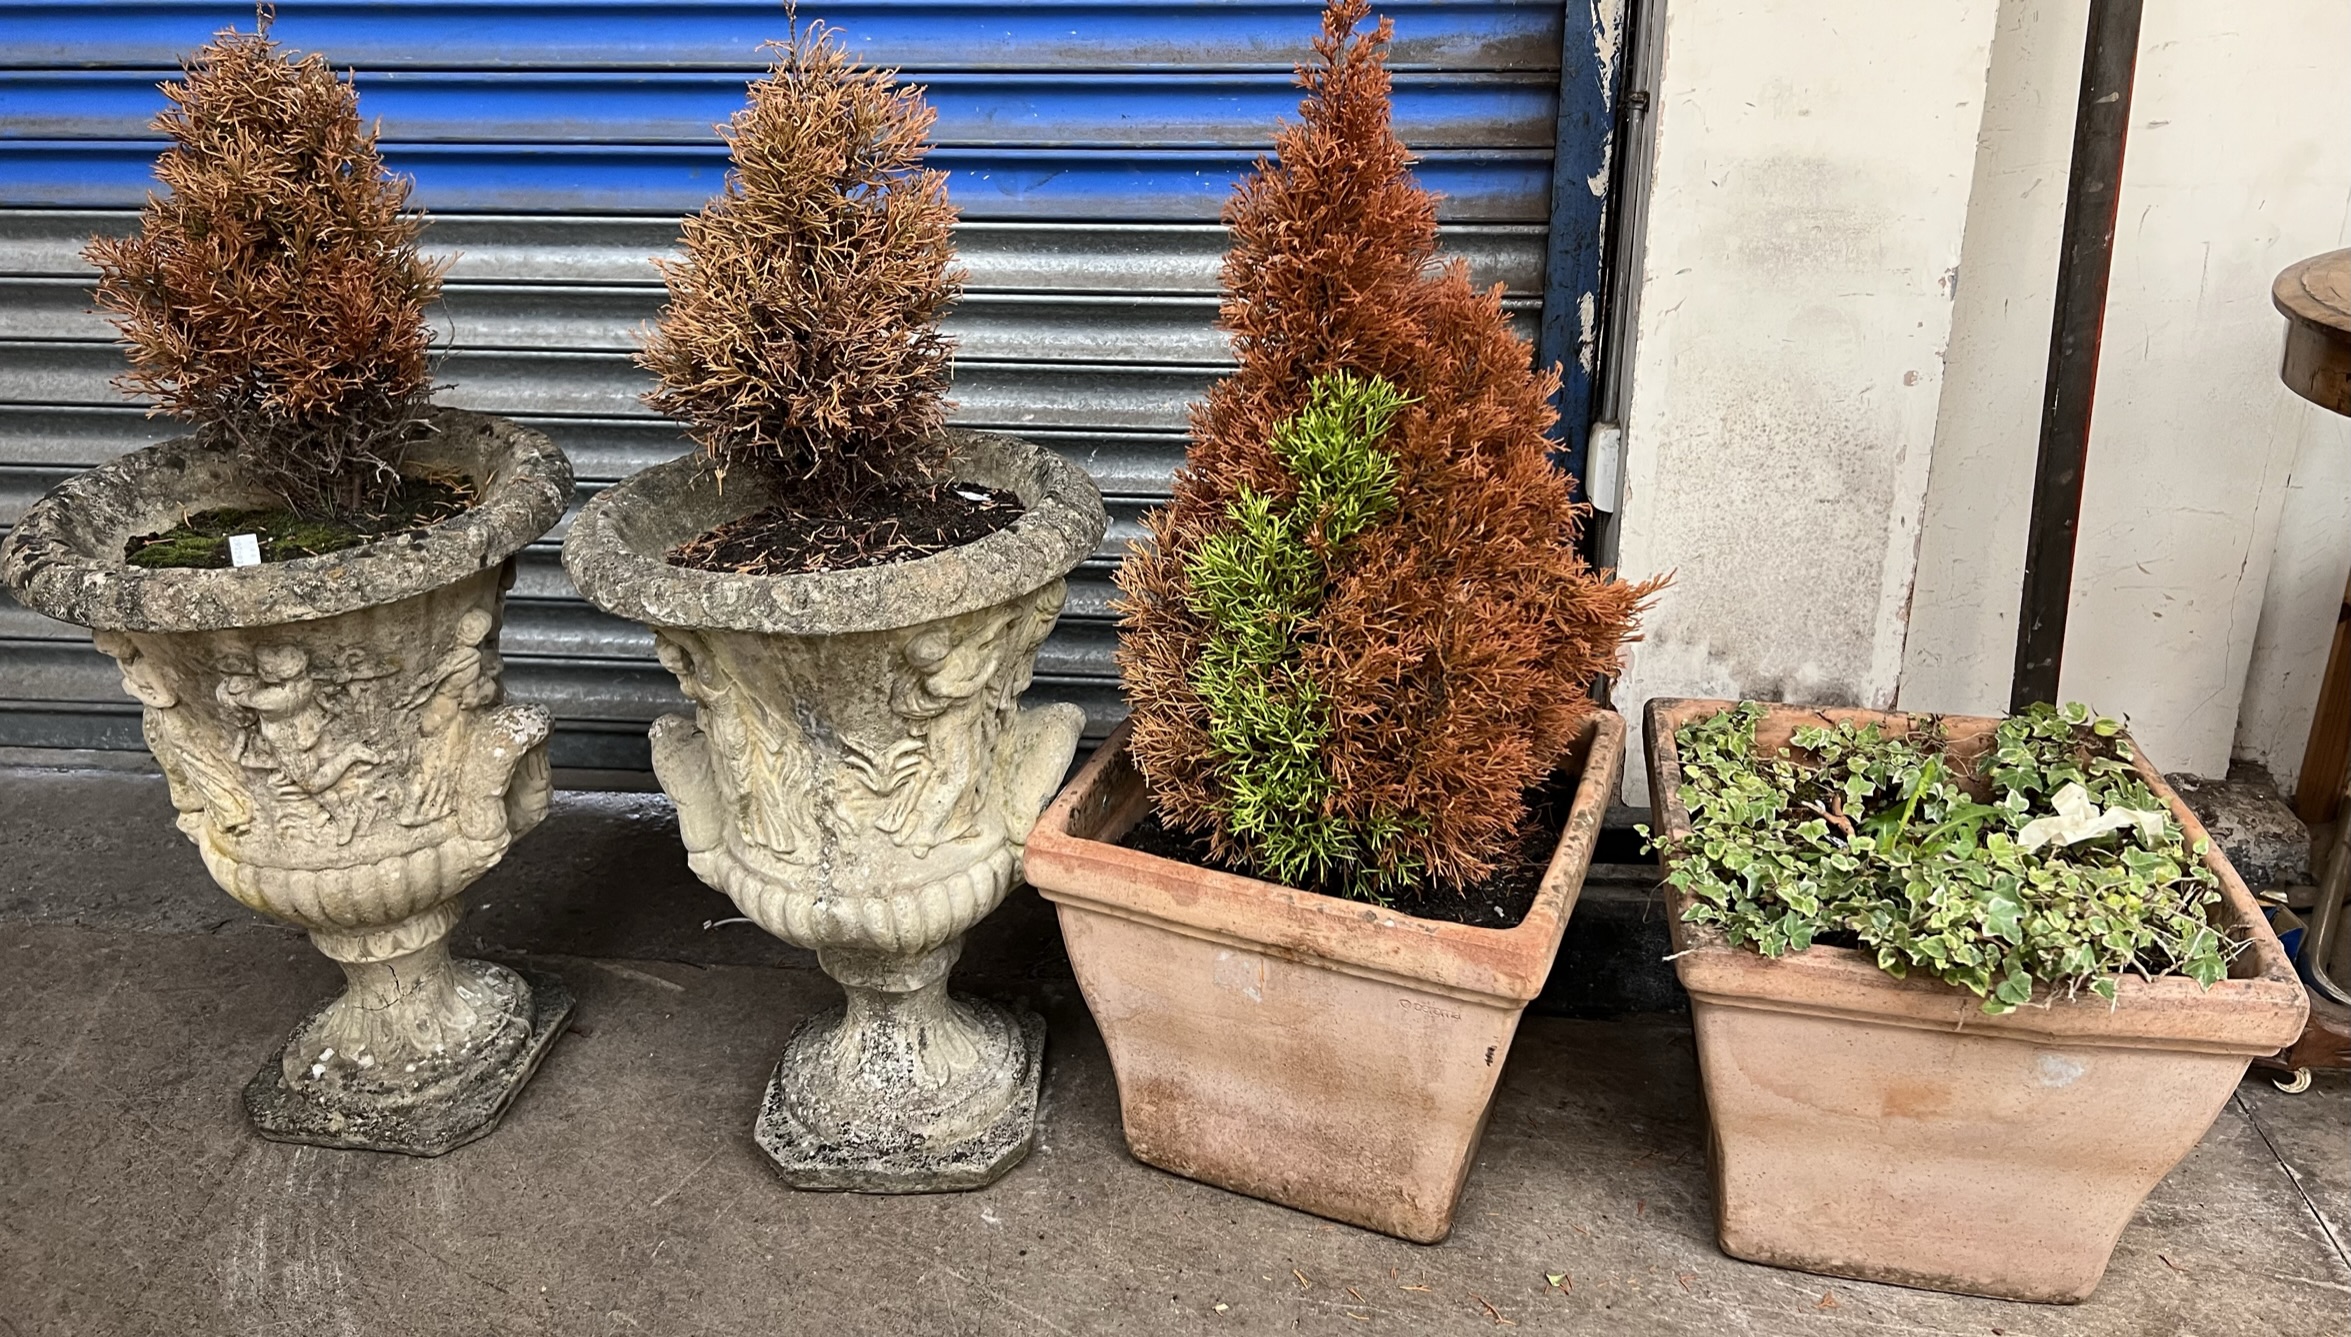 A pair of reconstituted stone garden urn planters together with two square terracotta pots